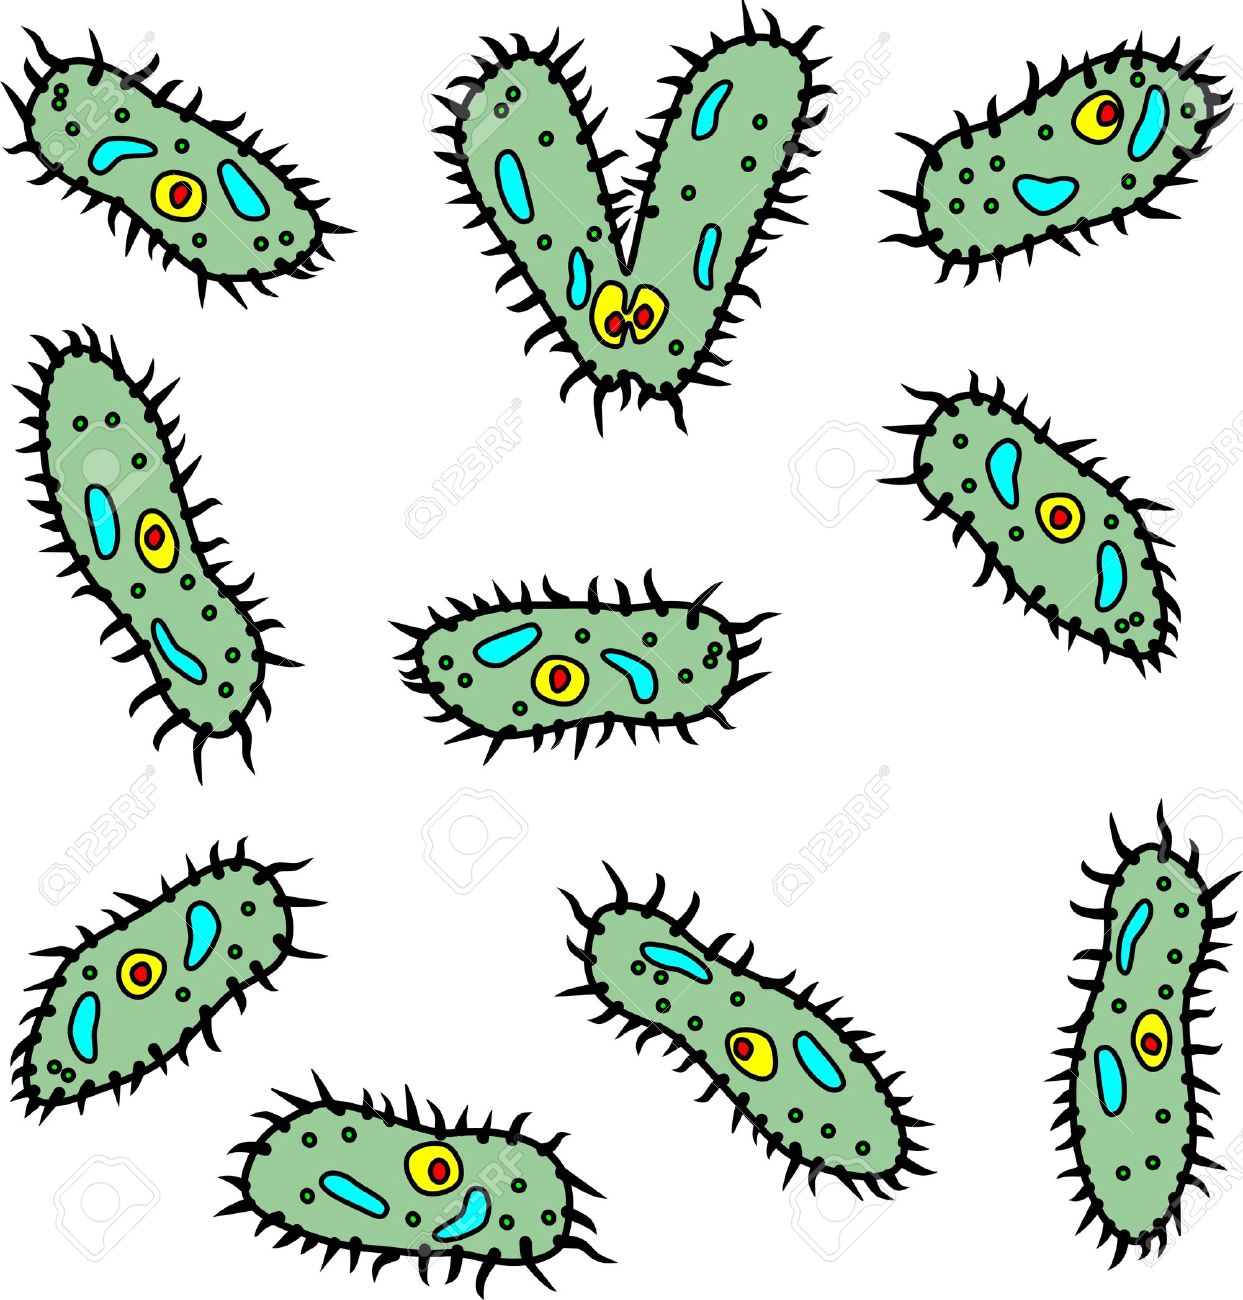 Funny bacteria clip art. Some vector microbes .